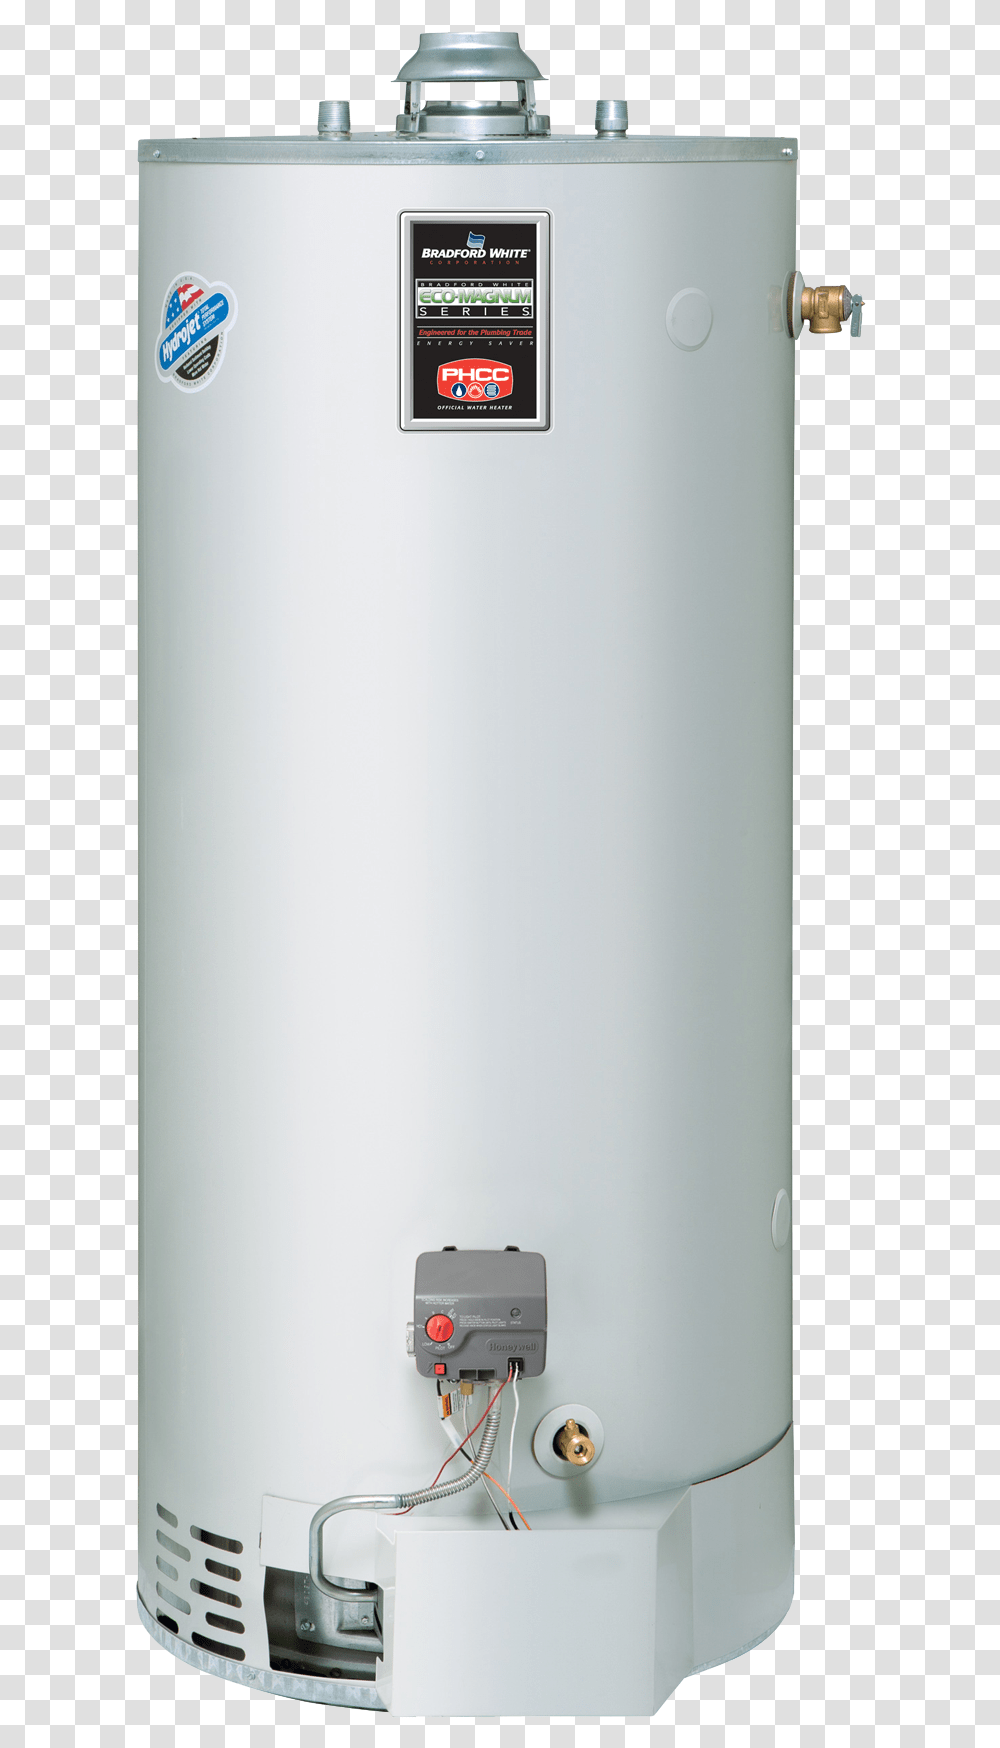 Electric Water Heater Picture Hot Water Heater, Appliance, Refrigerator, Space Heater Transparent Png